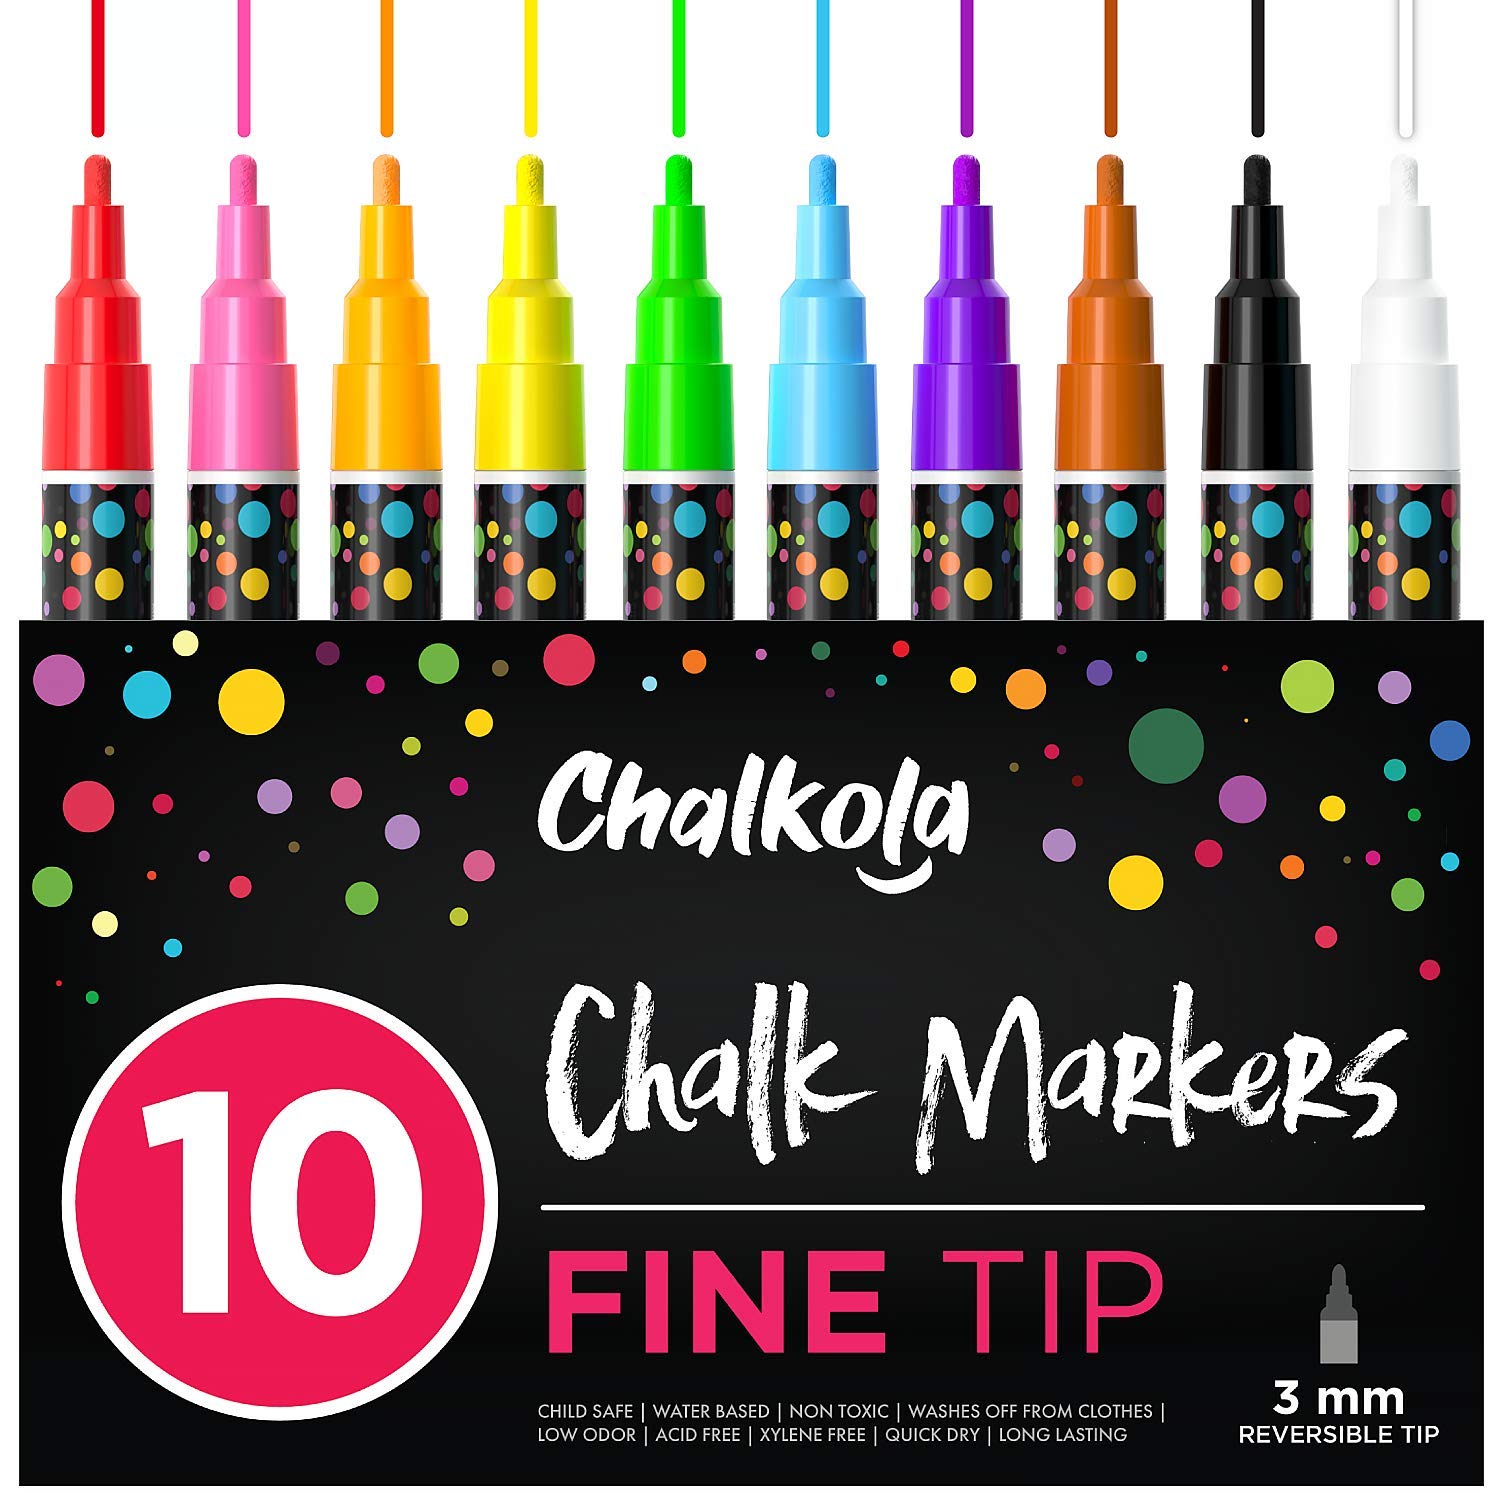  Metallic Liquid Chalk Markers for Chalkboard, 8 Pack 10mm Jumbo  Liquid Chalk Marker Chalkboard Markers,Neon Glass Markers Pen,Window Paint  Markers for Bistro, Menu, Chalkboard, Poster, Business : Arts, Crafts &  Sewing